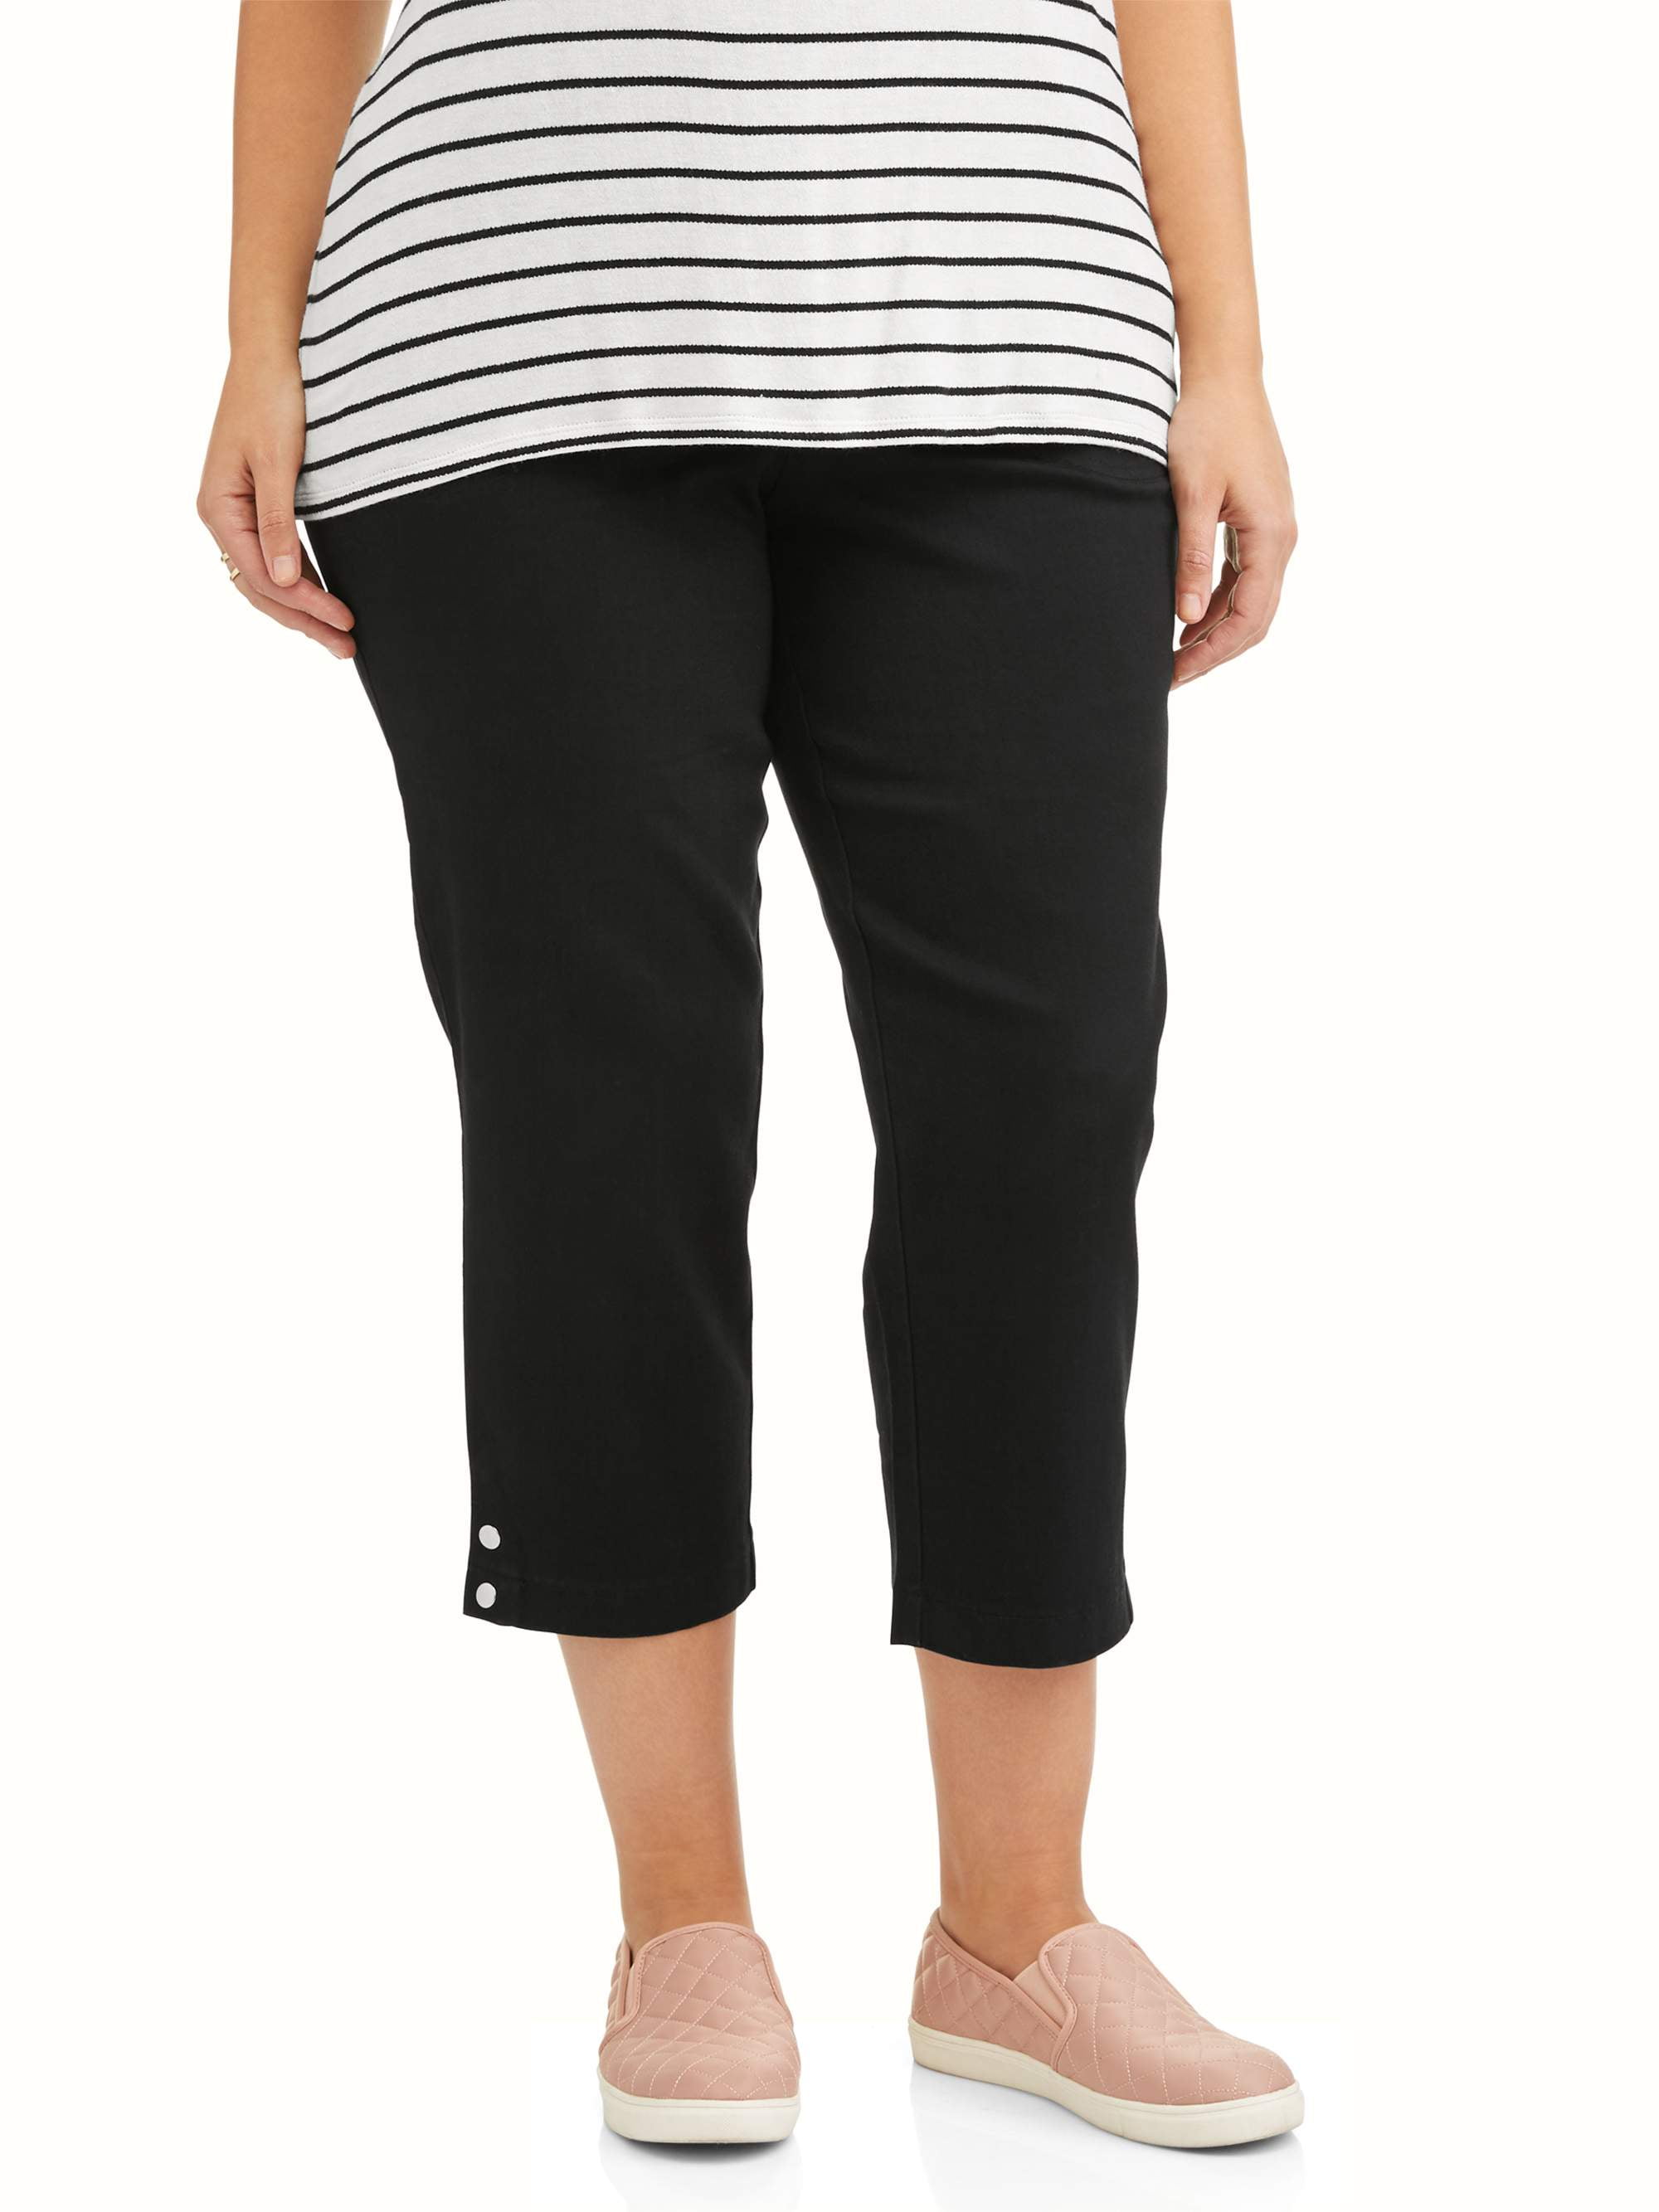 Just My Size - Just My Size Women's Plus Size Pull On Elastic Waist